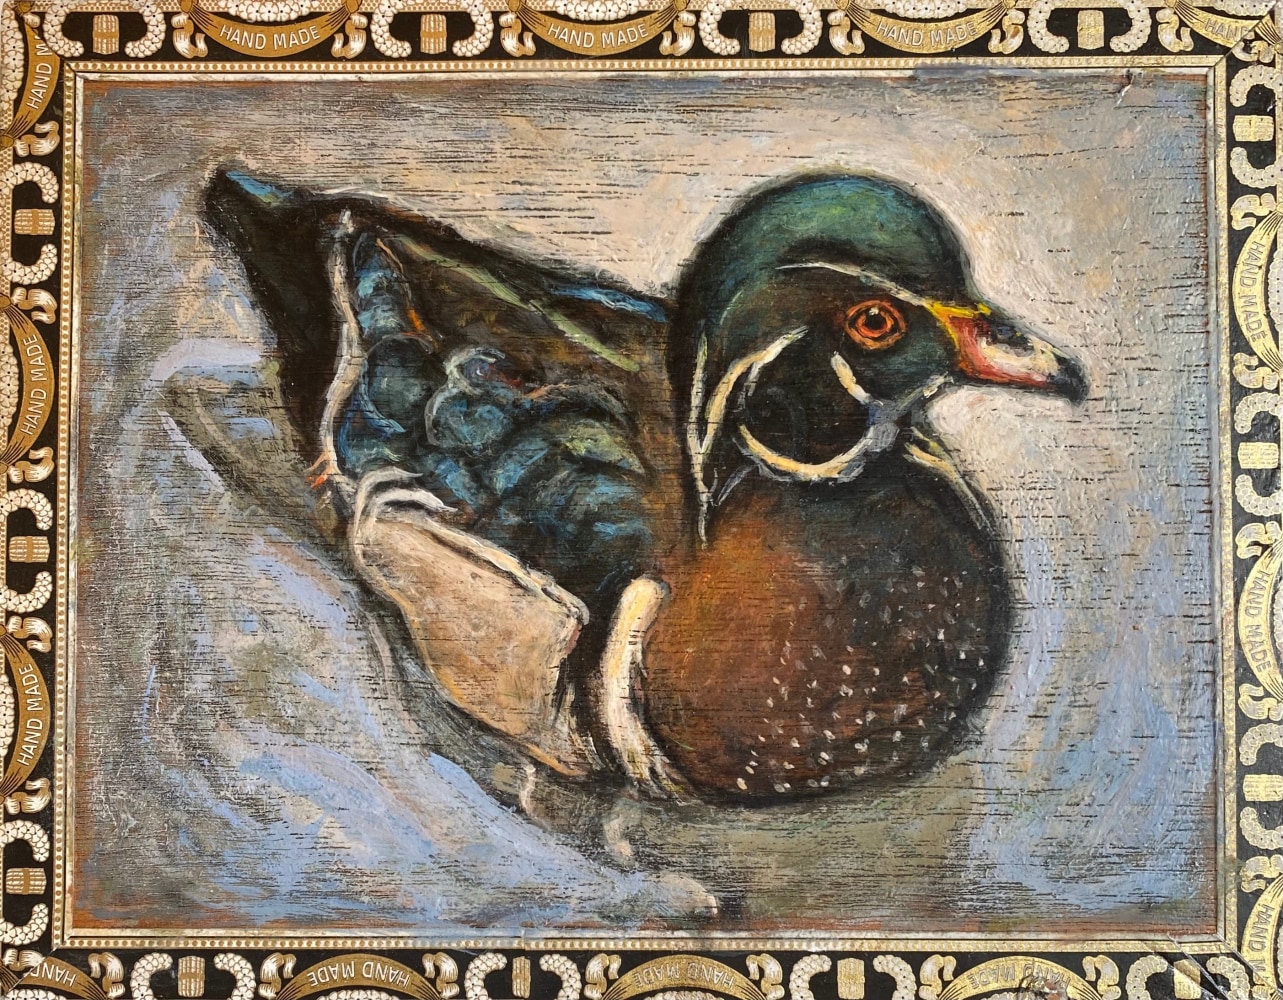 Ed Musante Wood Duck / Hand Made, 2016 mixed media on cigar box 7 7/16 x 9 3/8 x 2 1/8 in.